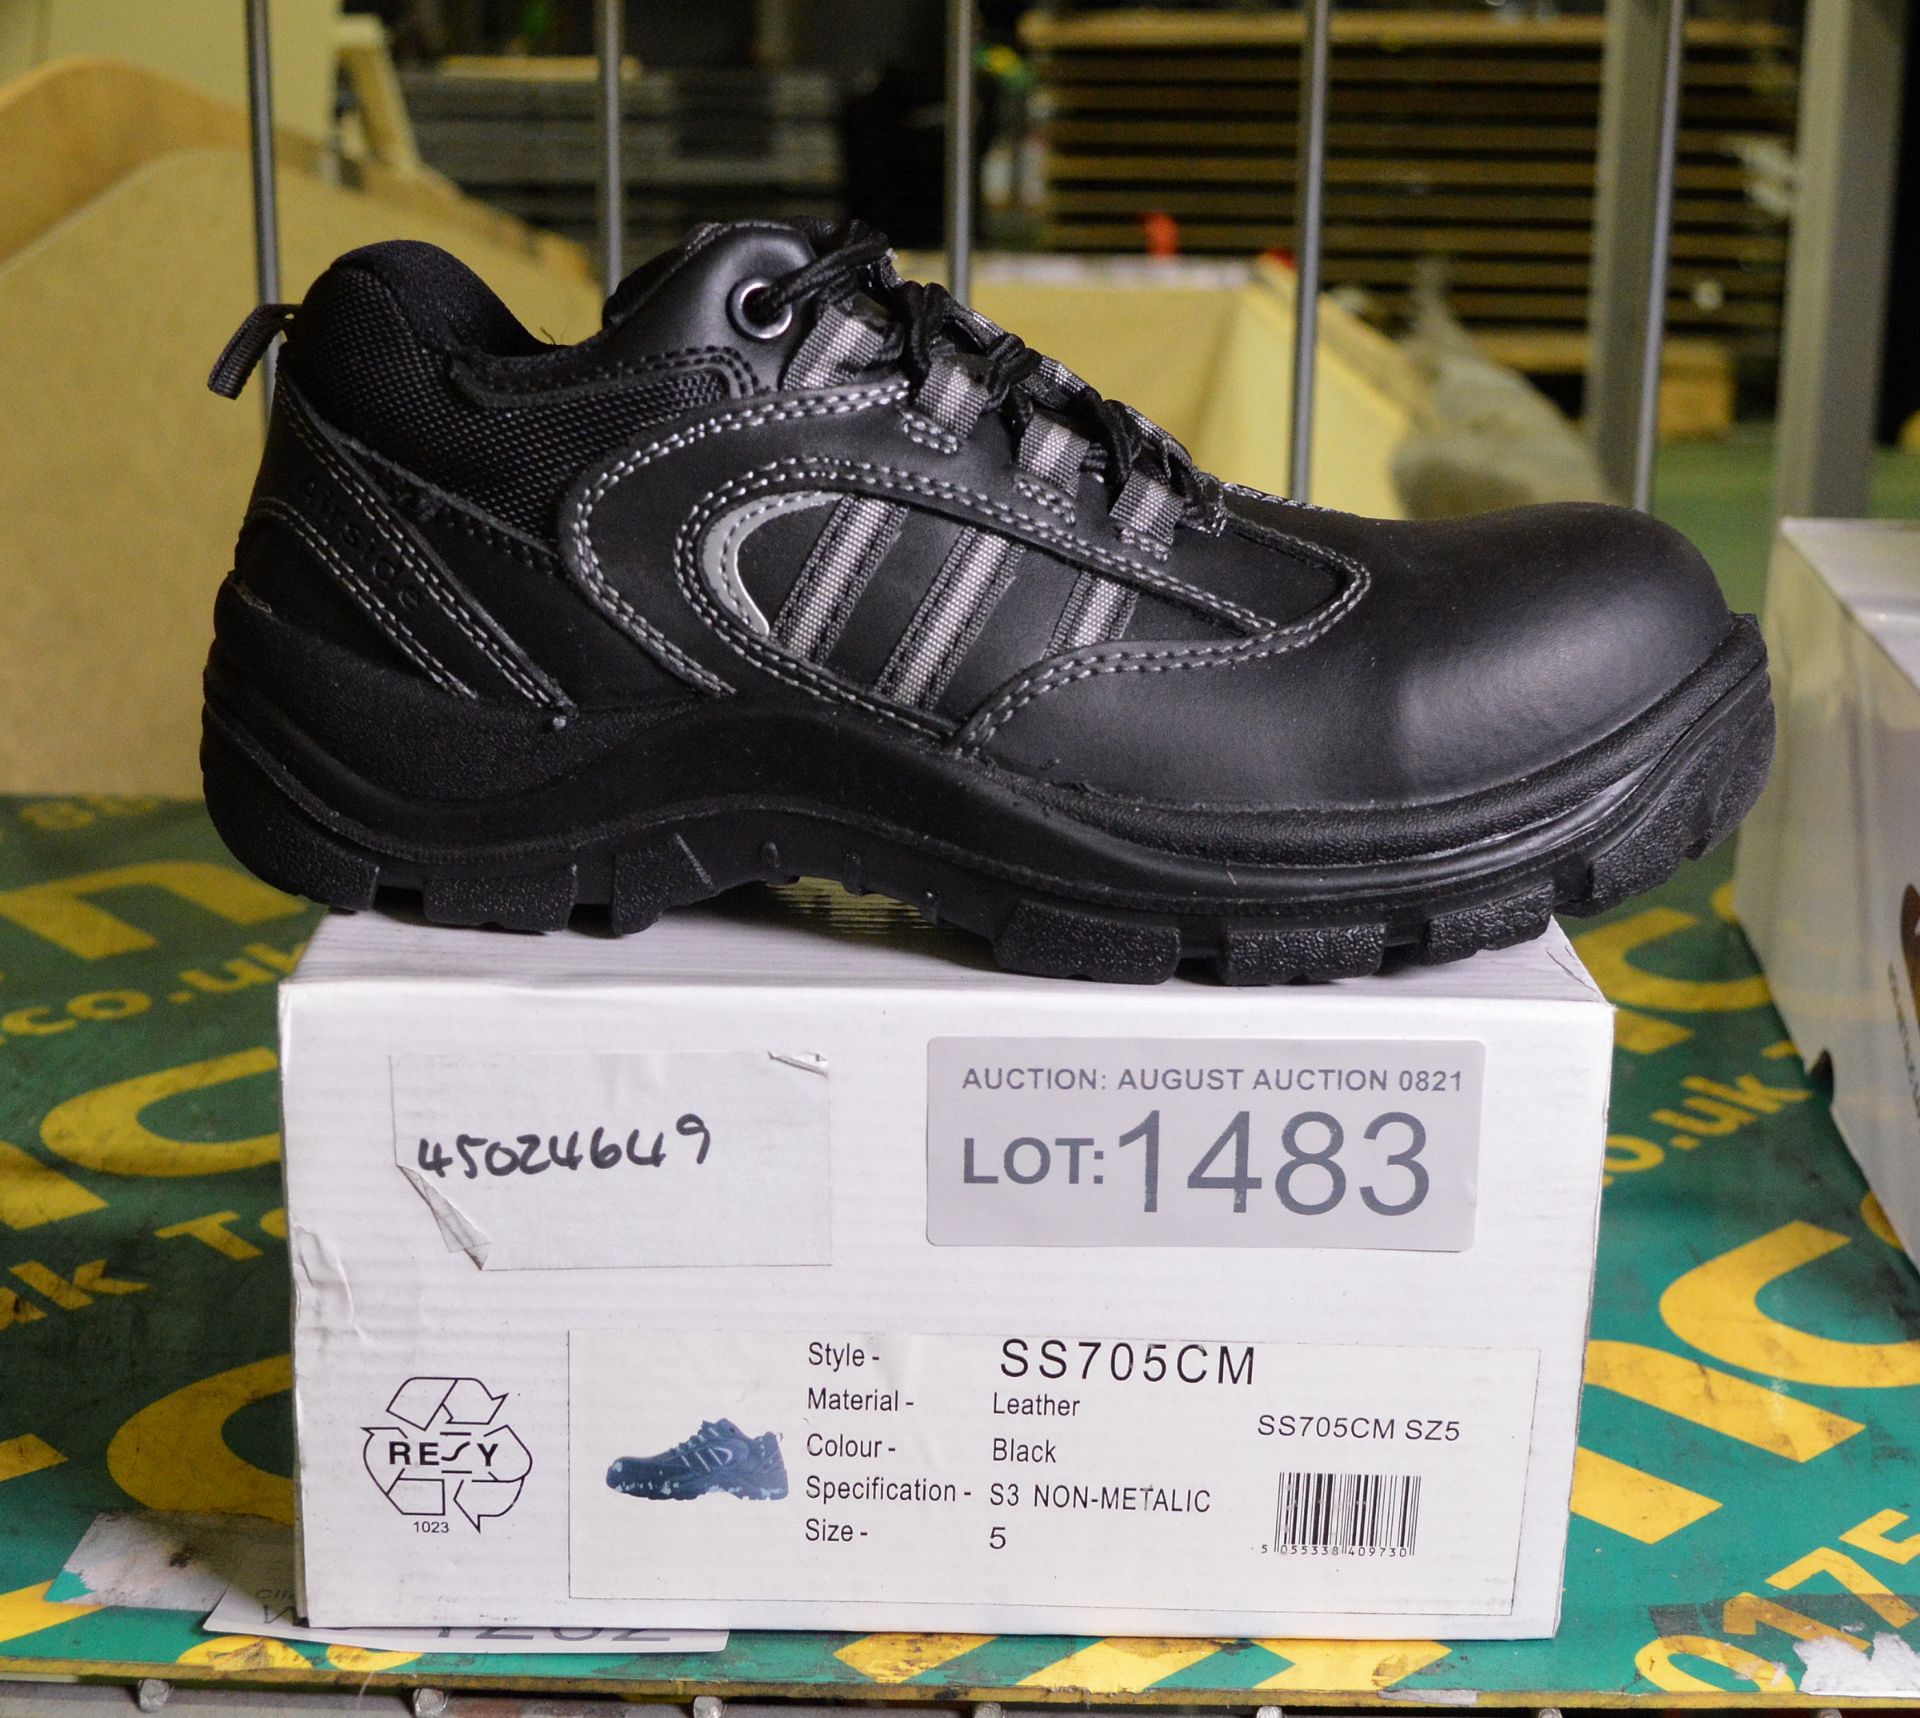 Airside safety shoes - see pictures for types & size